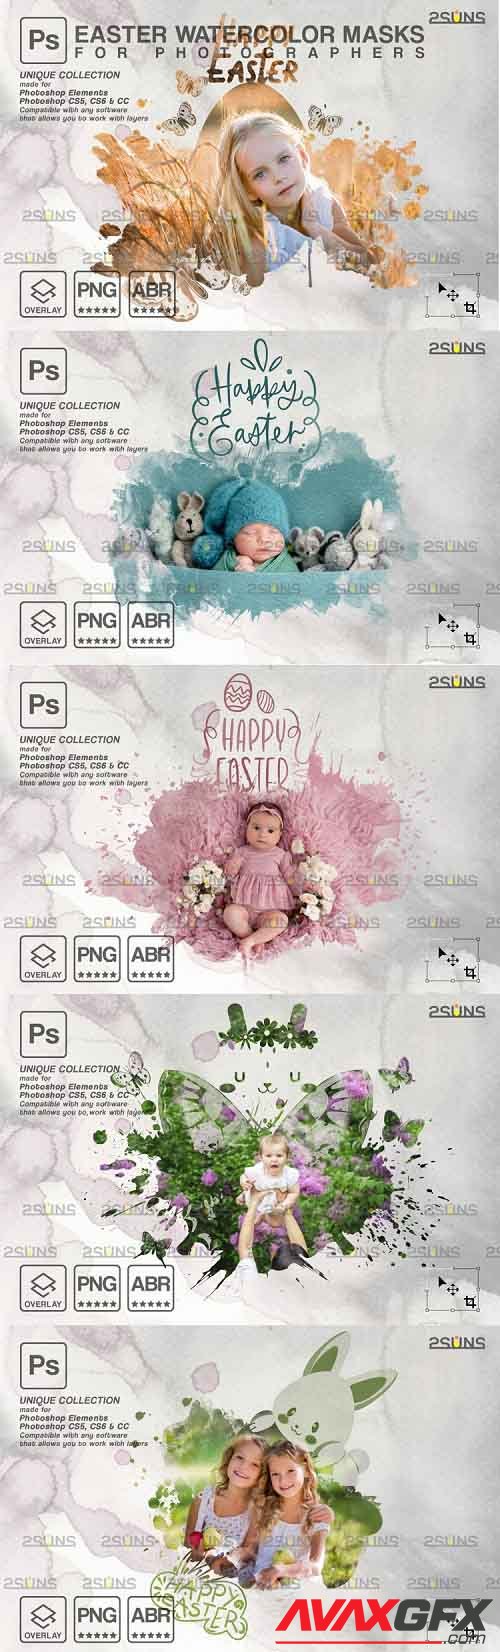 Easter Watercolor overlay & Photoshop overlay V2 - 1224217